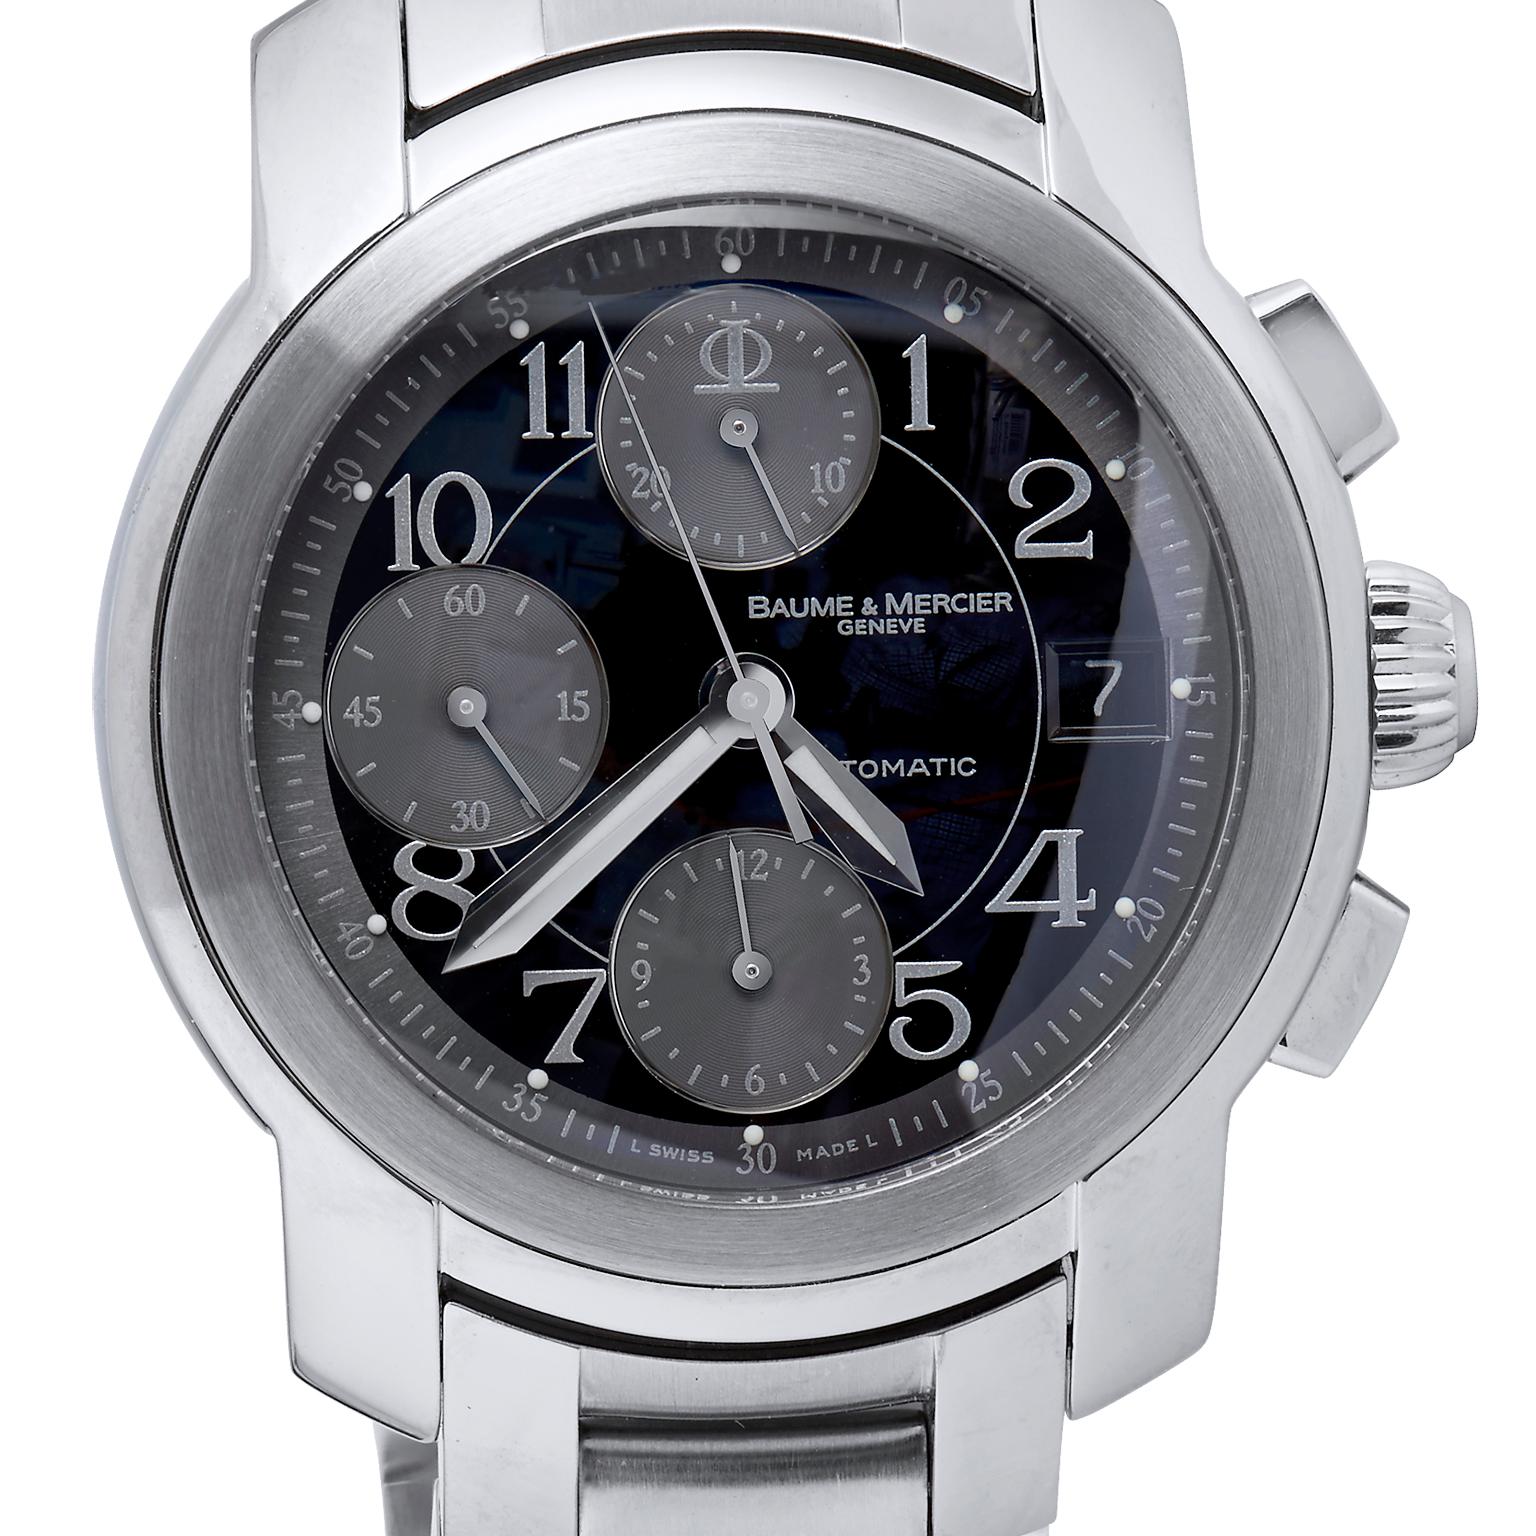 Men's Baume & Mercier Capeland stainless steel watch with a stainless steel case and bracelet. Fixed bezel. Grey dial with steel hands and index - Arabic numerals hour markers. Dial Type: Analog. Date display at the 3 o'clock position. Scratch